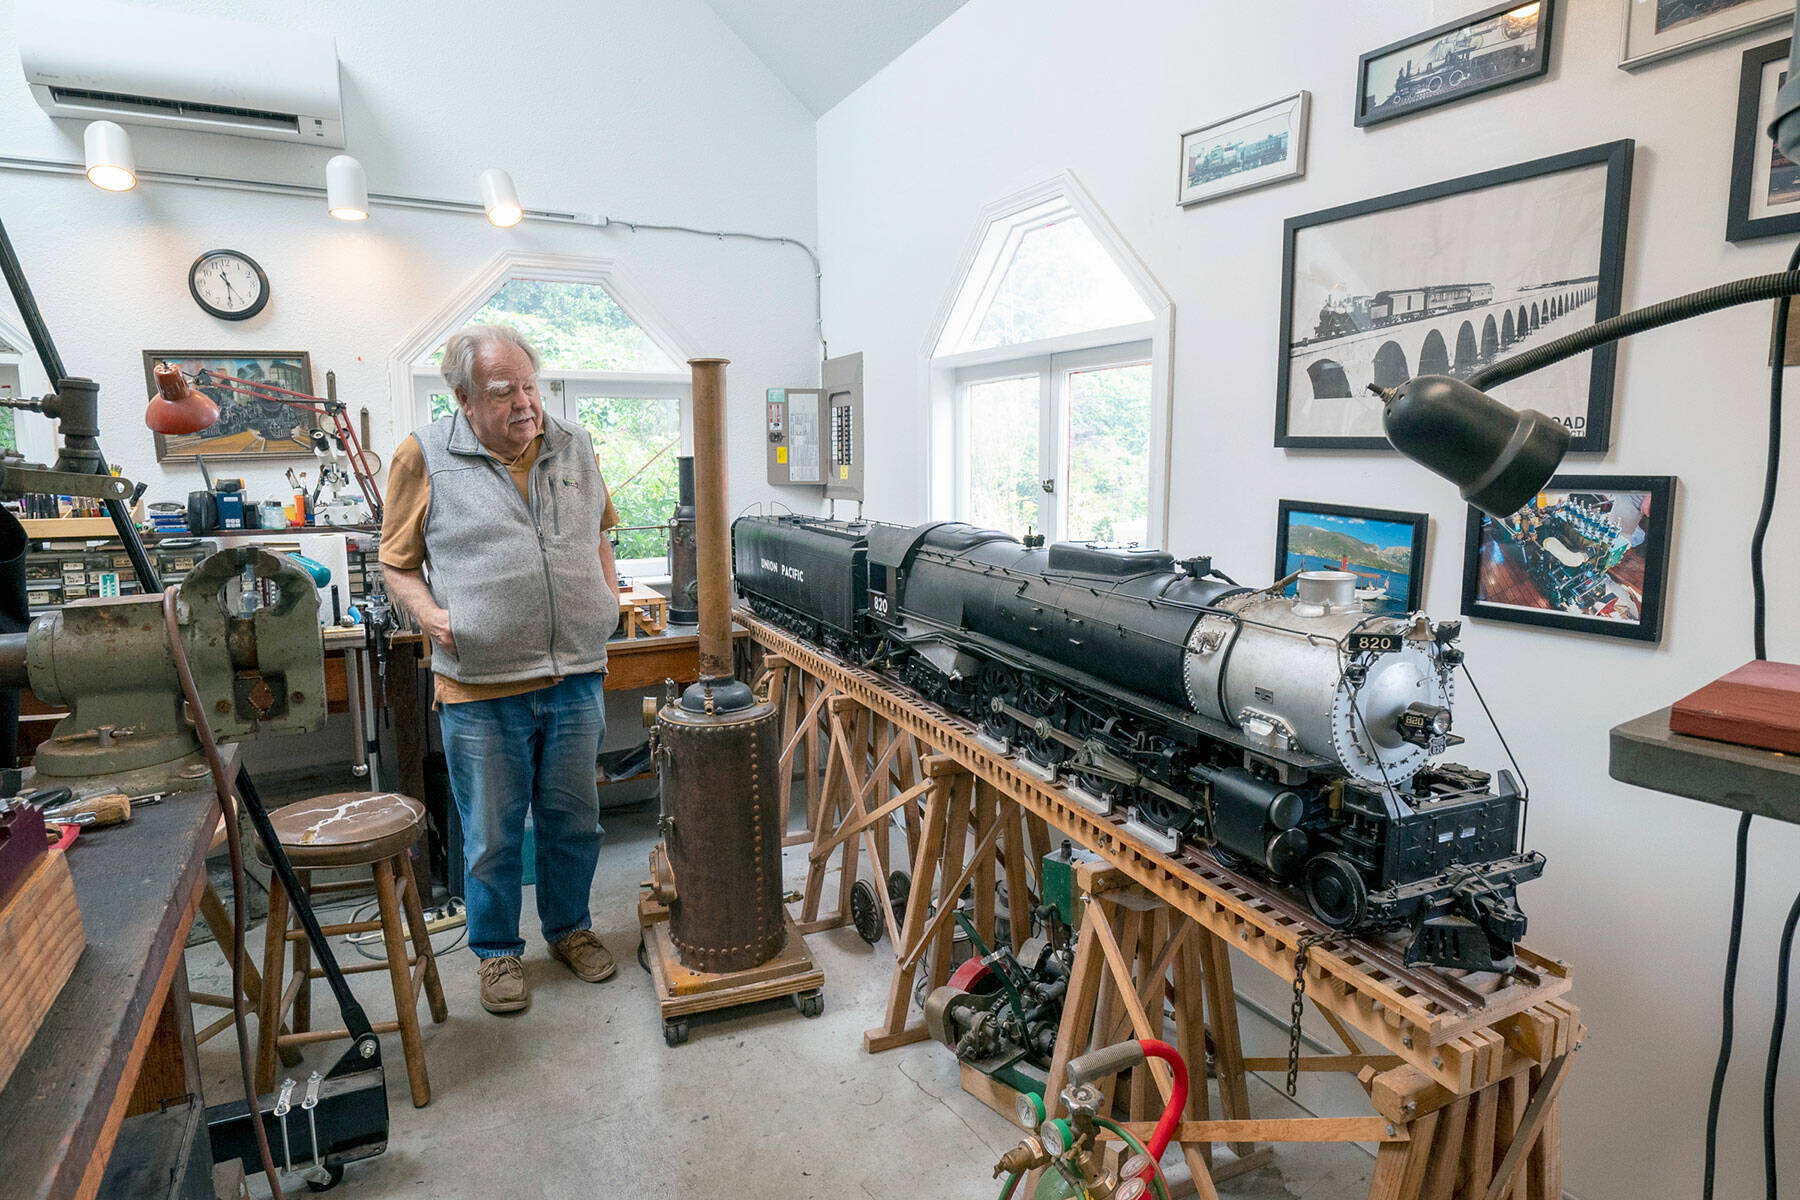 Jim Kunc, a Port Townsend resident and a retired North West Airlines pilot, proudly shows off the 1-inch scale model of a 1930s Union Pacific Northern train he built in his home shop. A lifelong train hobbyist, this model took 20 years to make. (Steve Mullensky/for Peninsula Daily News)